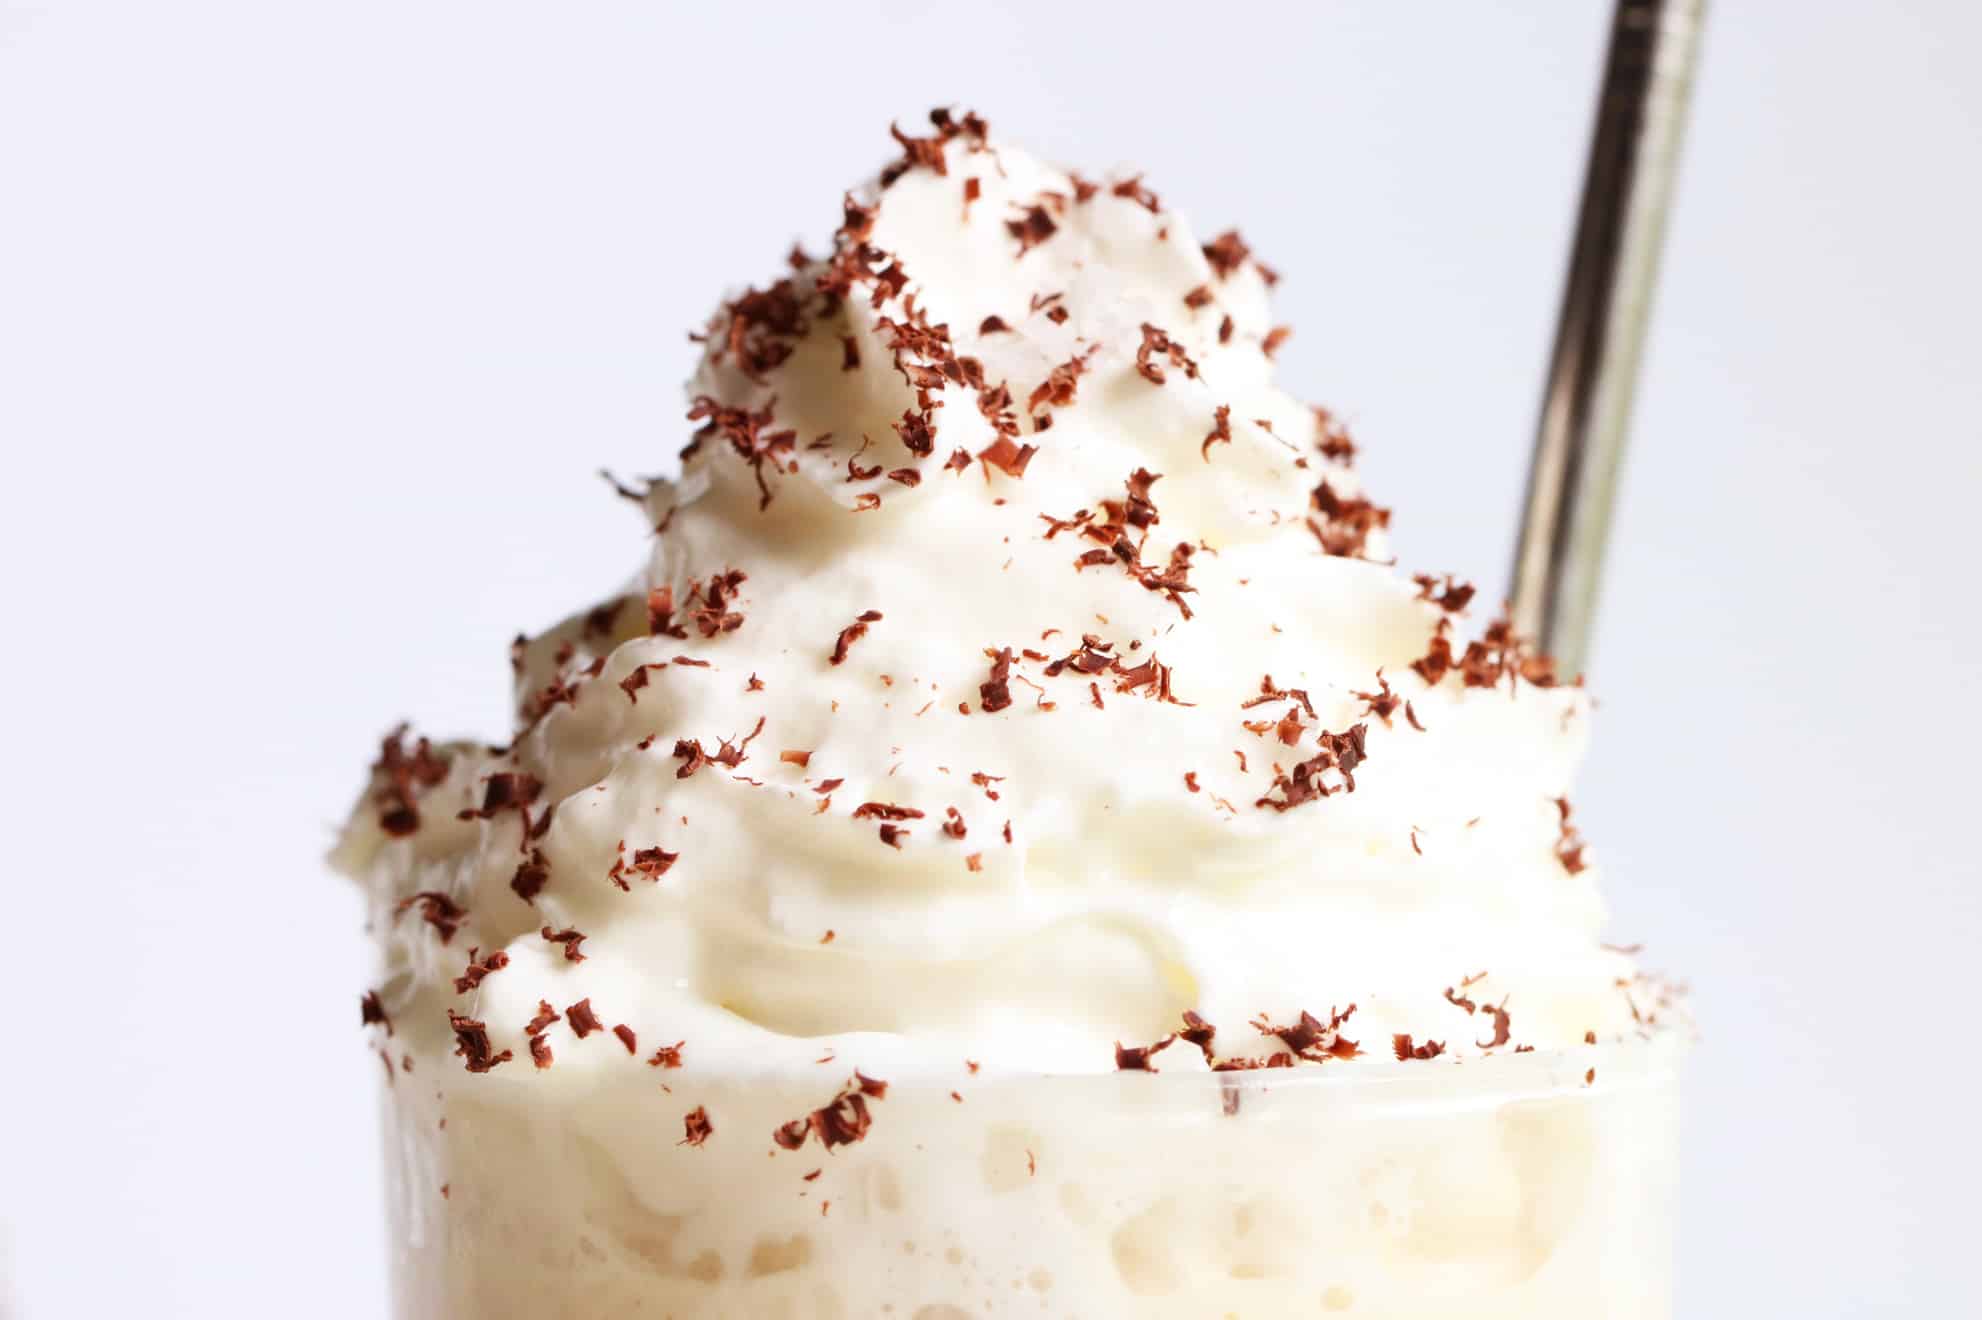 close up picture of whipped cream on top of a Frozen Vanilla Iced Latte with grated chocolate and a stainless steel straw